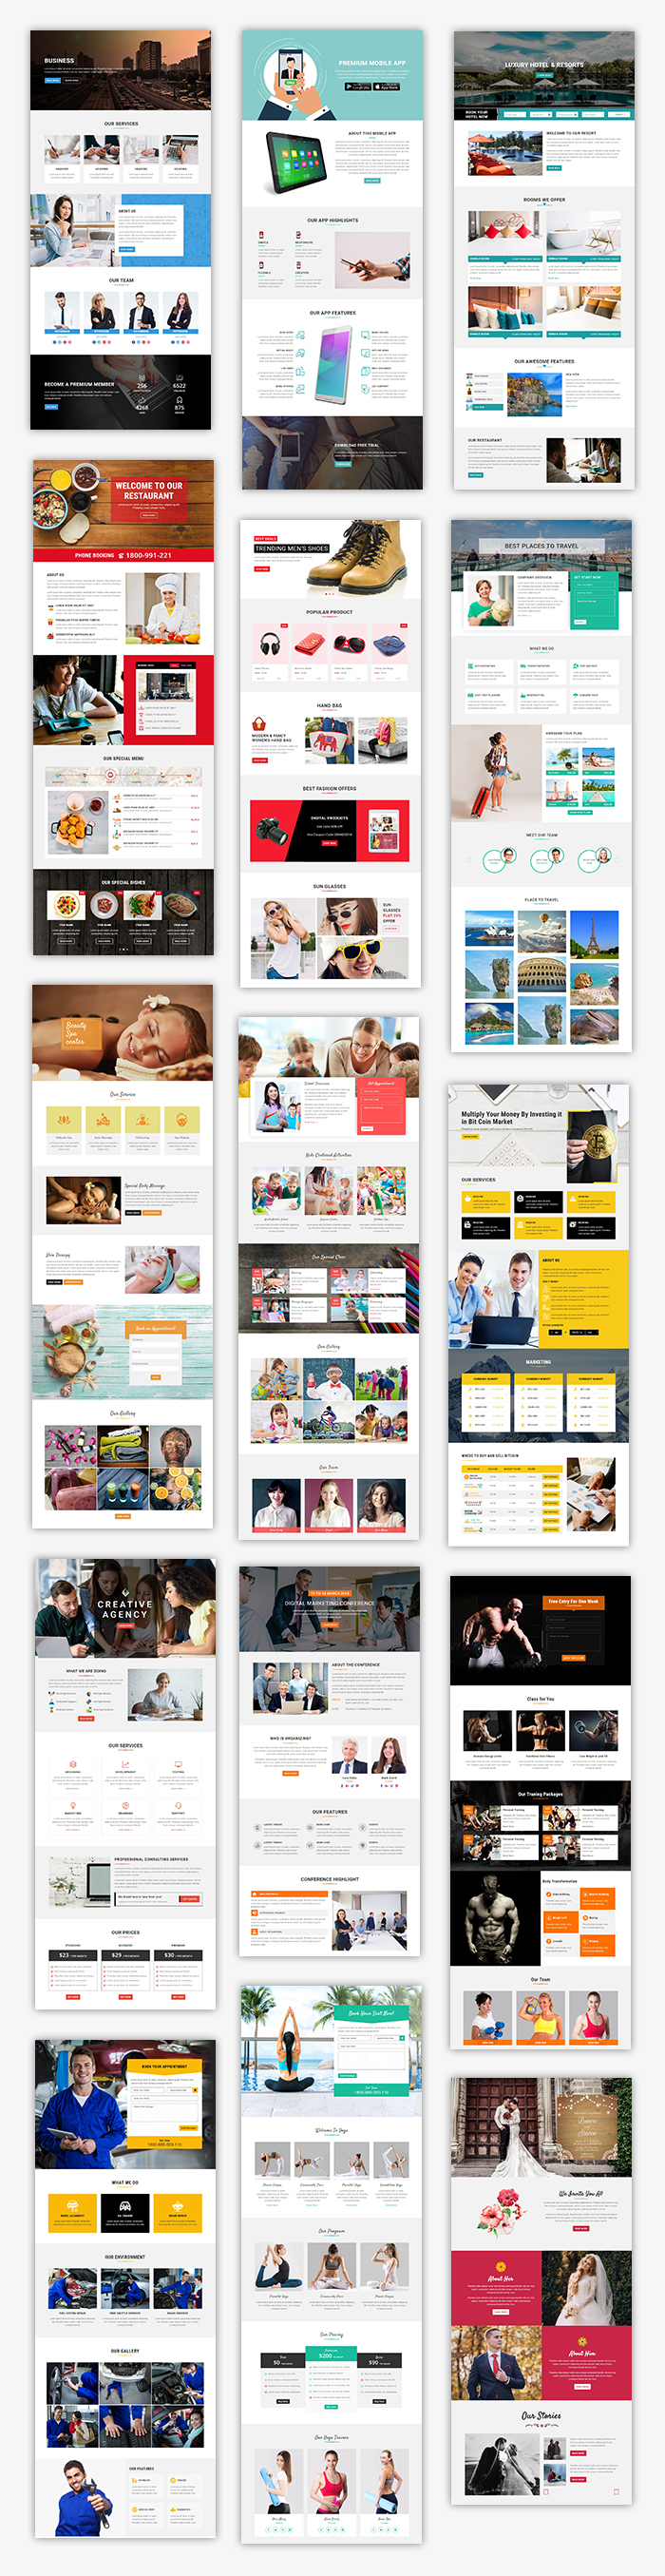 Grand - Lead Generating HTML Landing Pages - 2